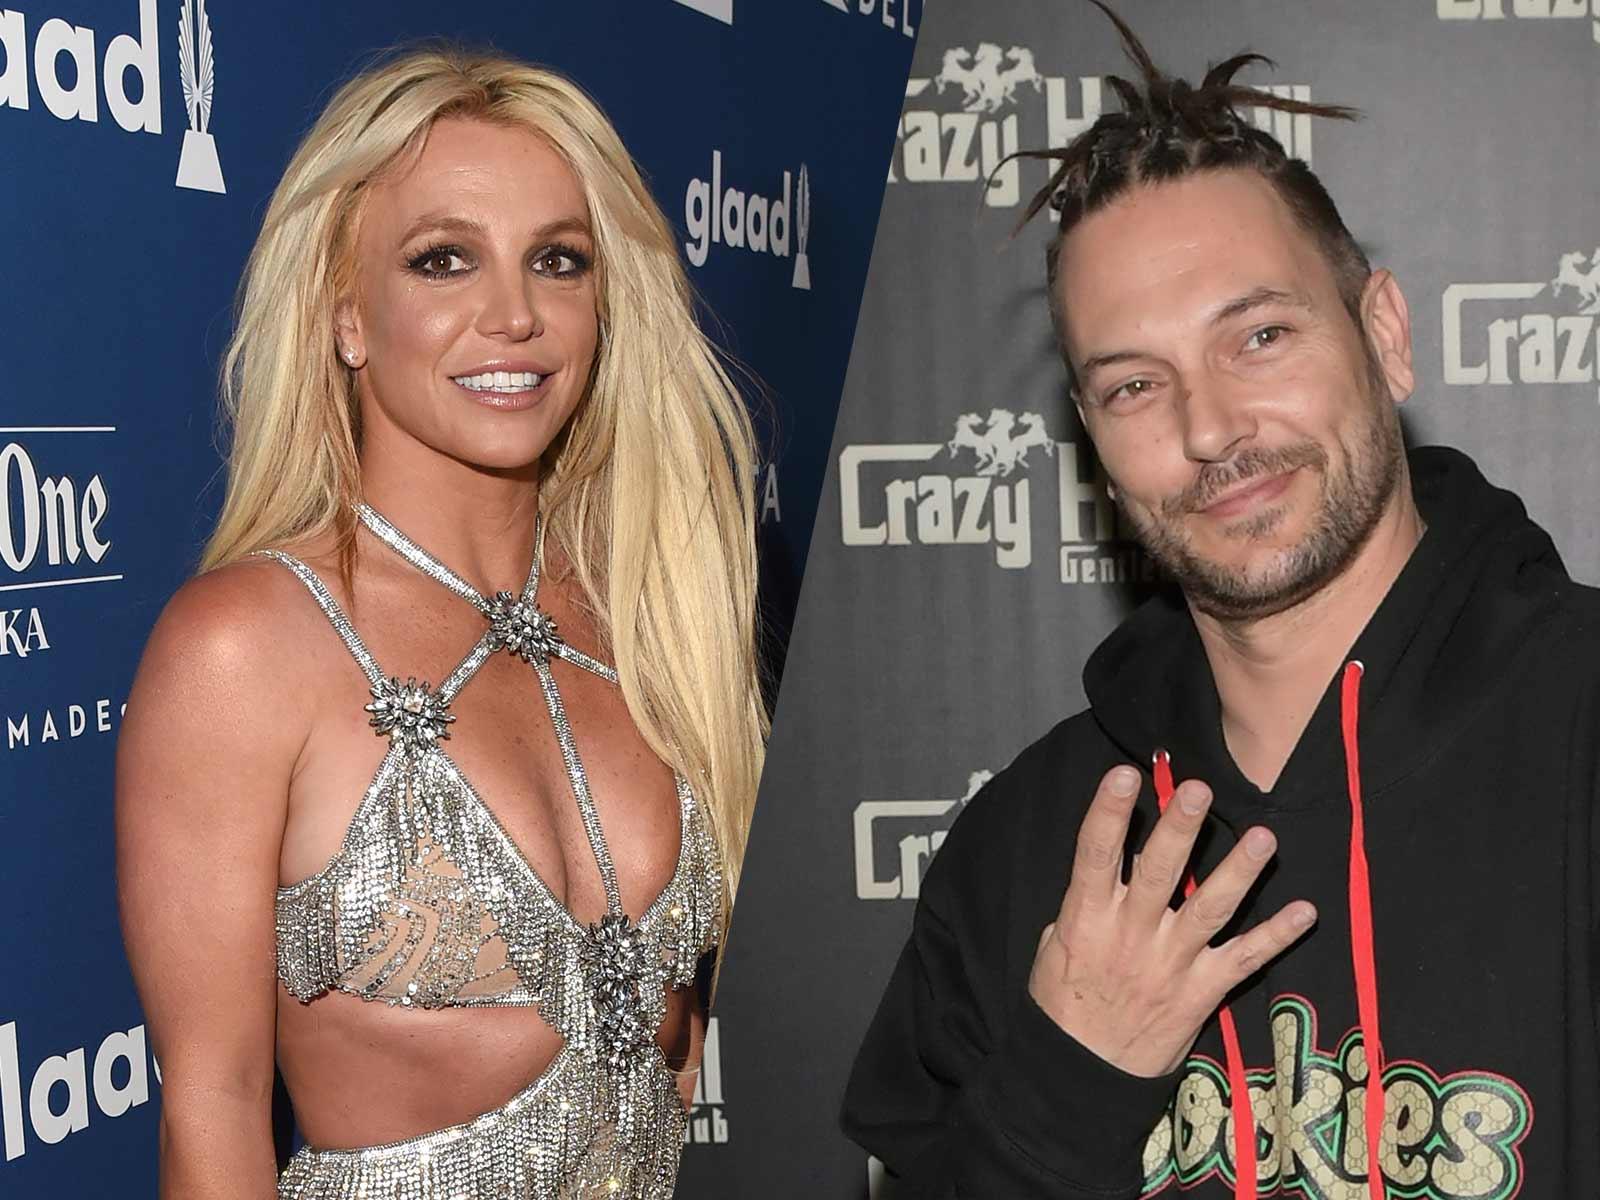 K-Fed Accuses Britney Spears of Treating the Court Like ‘Coachella’